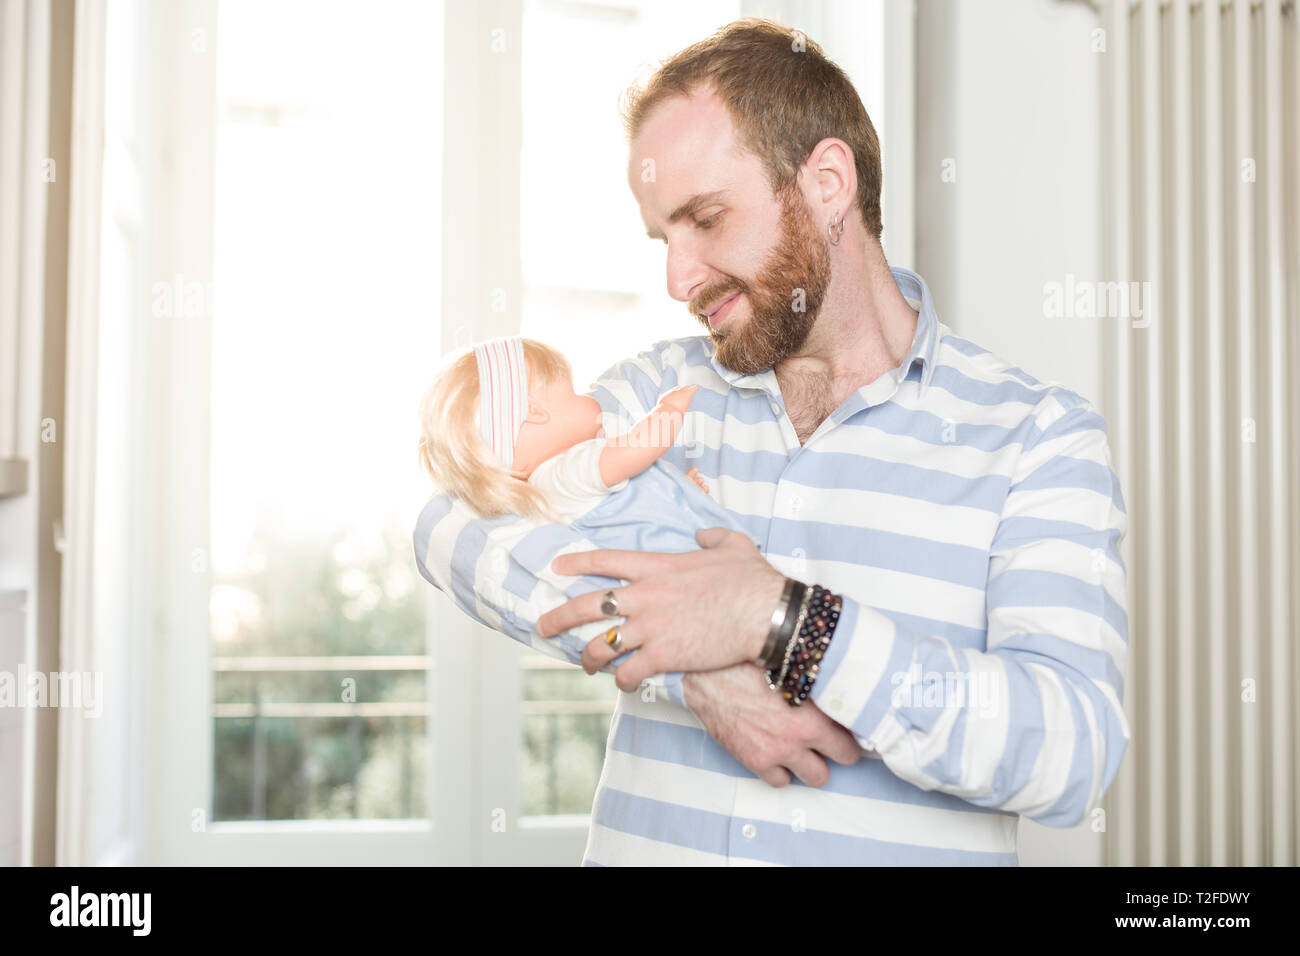 Smiling Redhead Man with Beard  Cradling a Doll Stock Photo